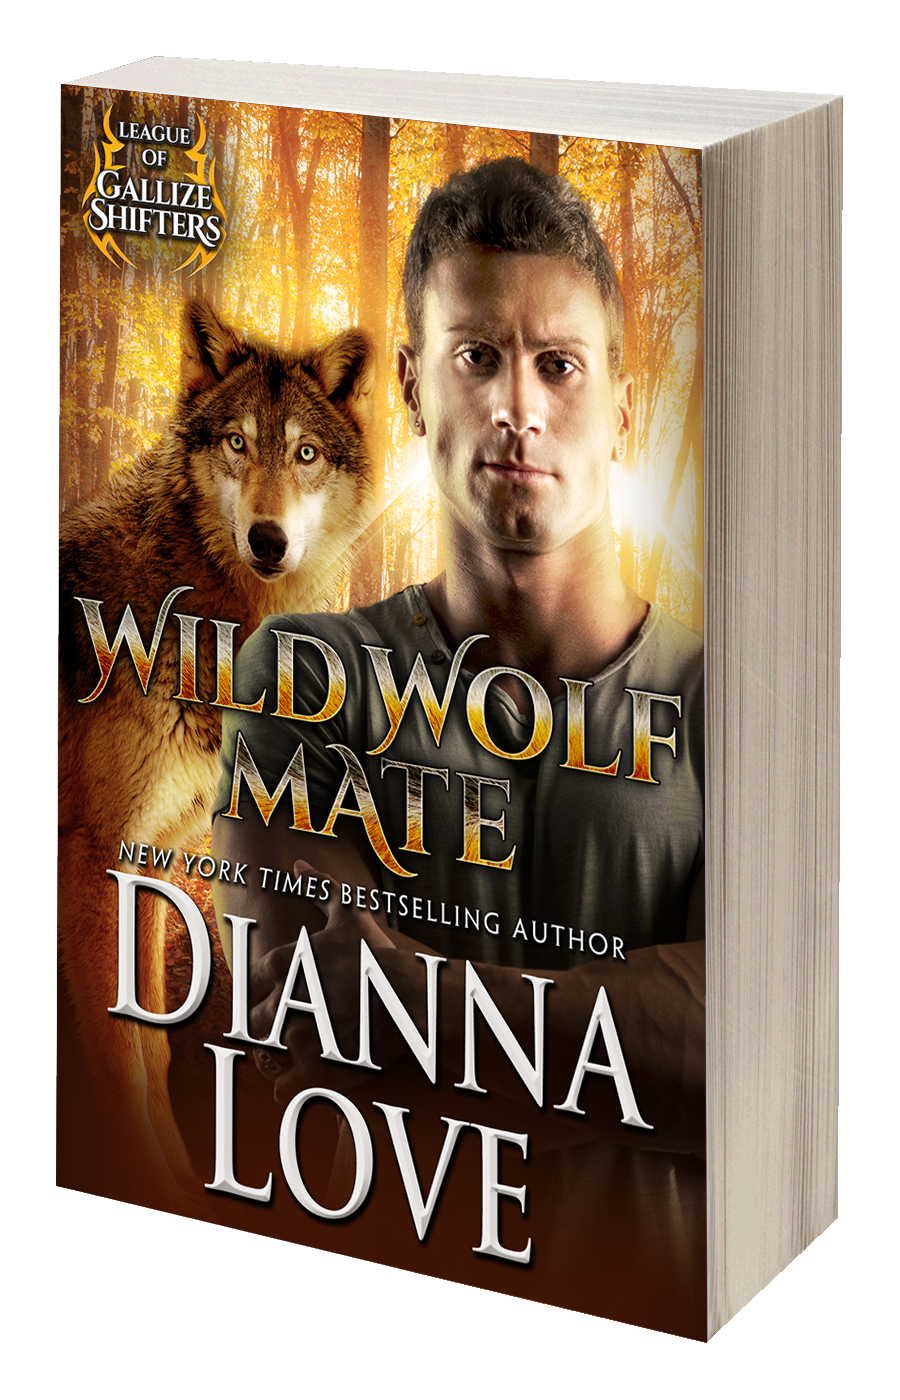 Wild Wolf Mate: League of Gallize Shifters book 5